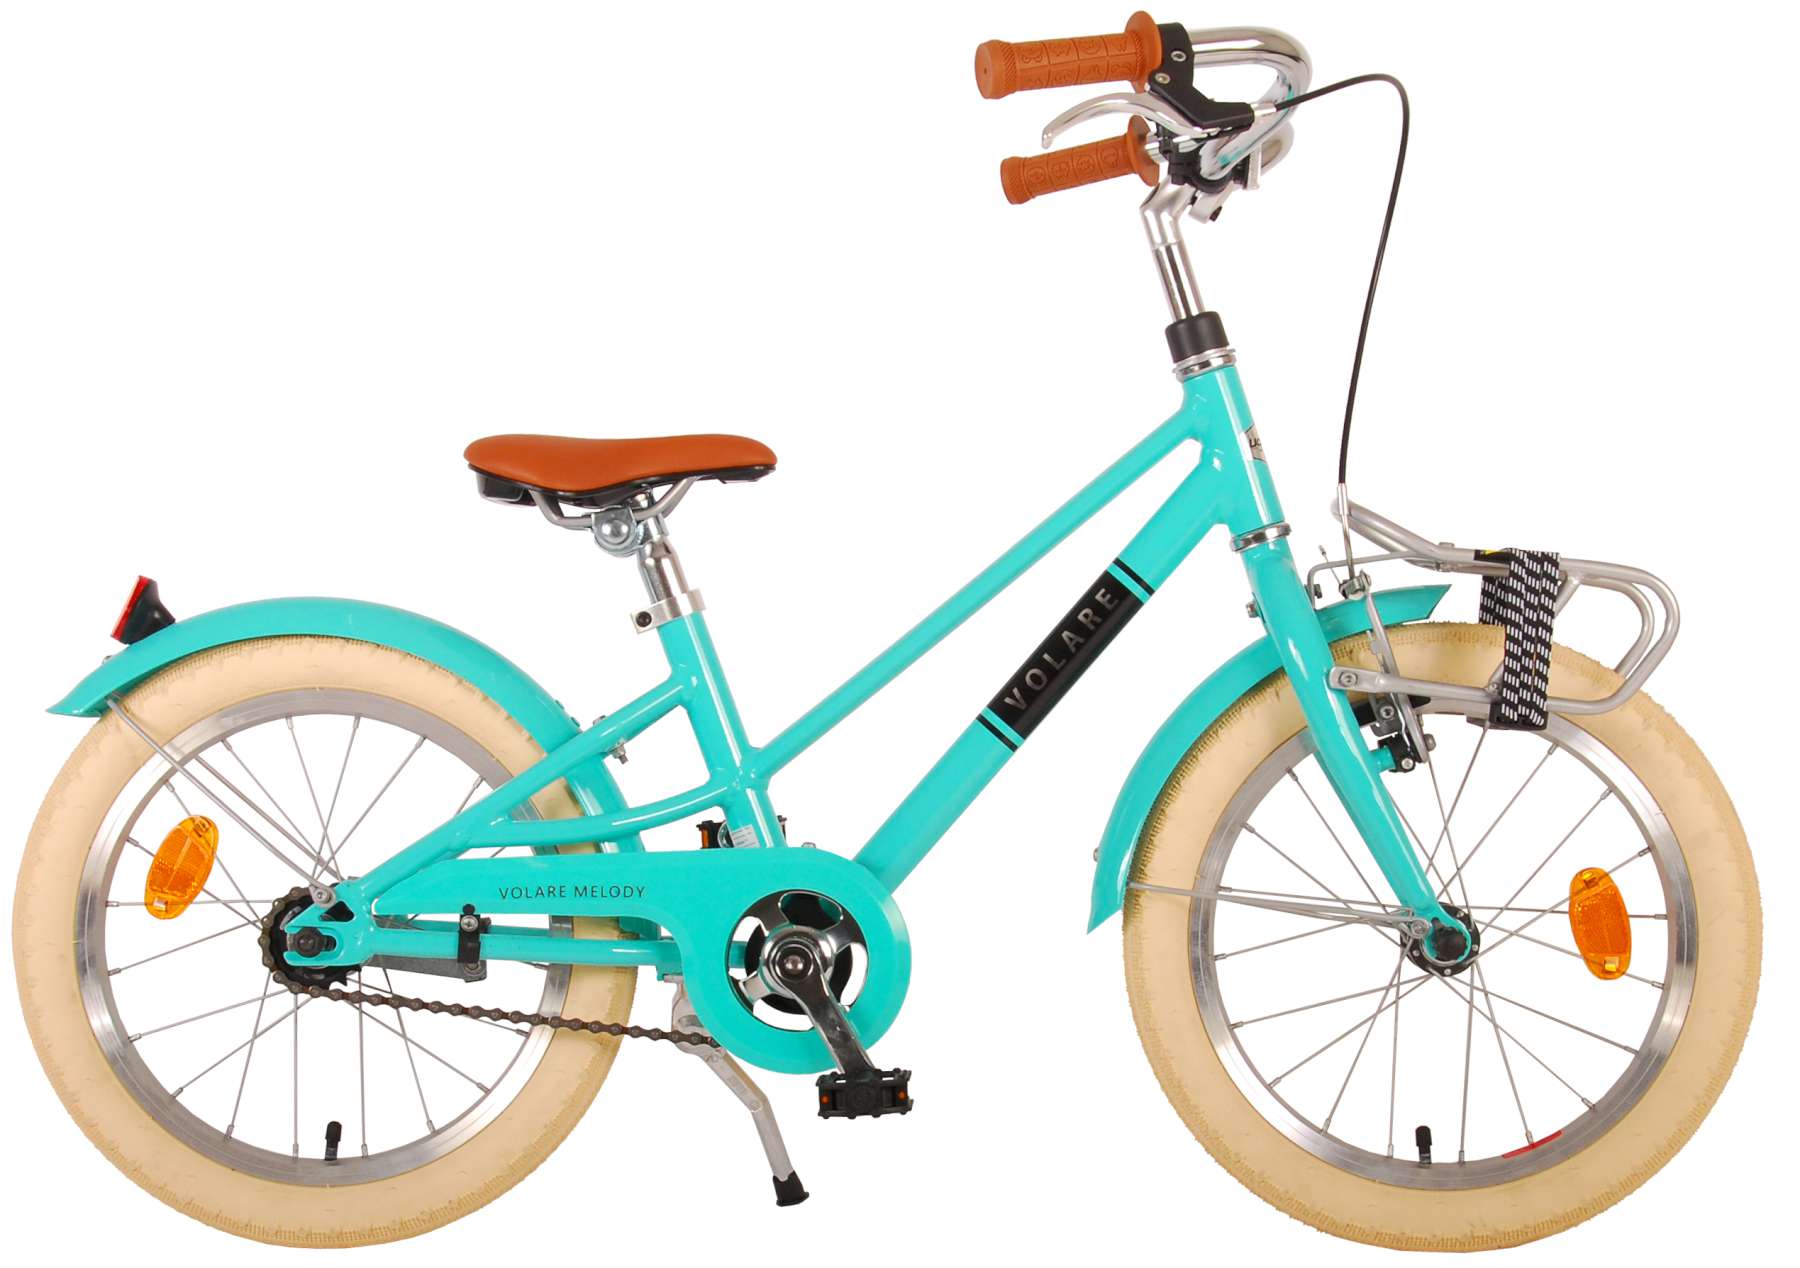 Volare - Children's Bicycle 16" - Melody Turquoise (21692) - Leker